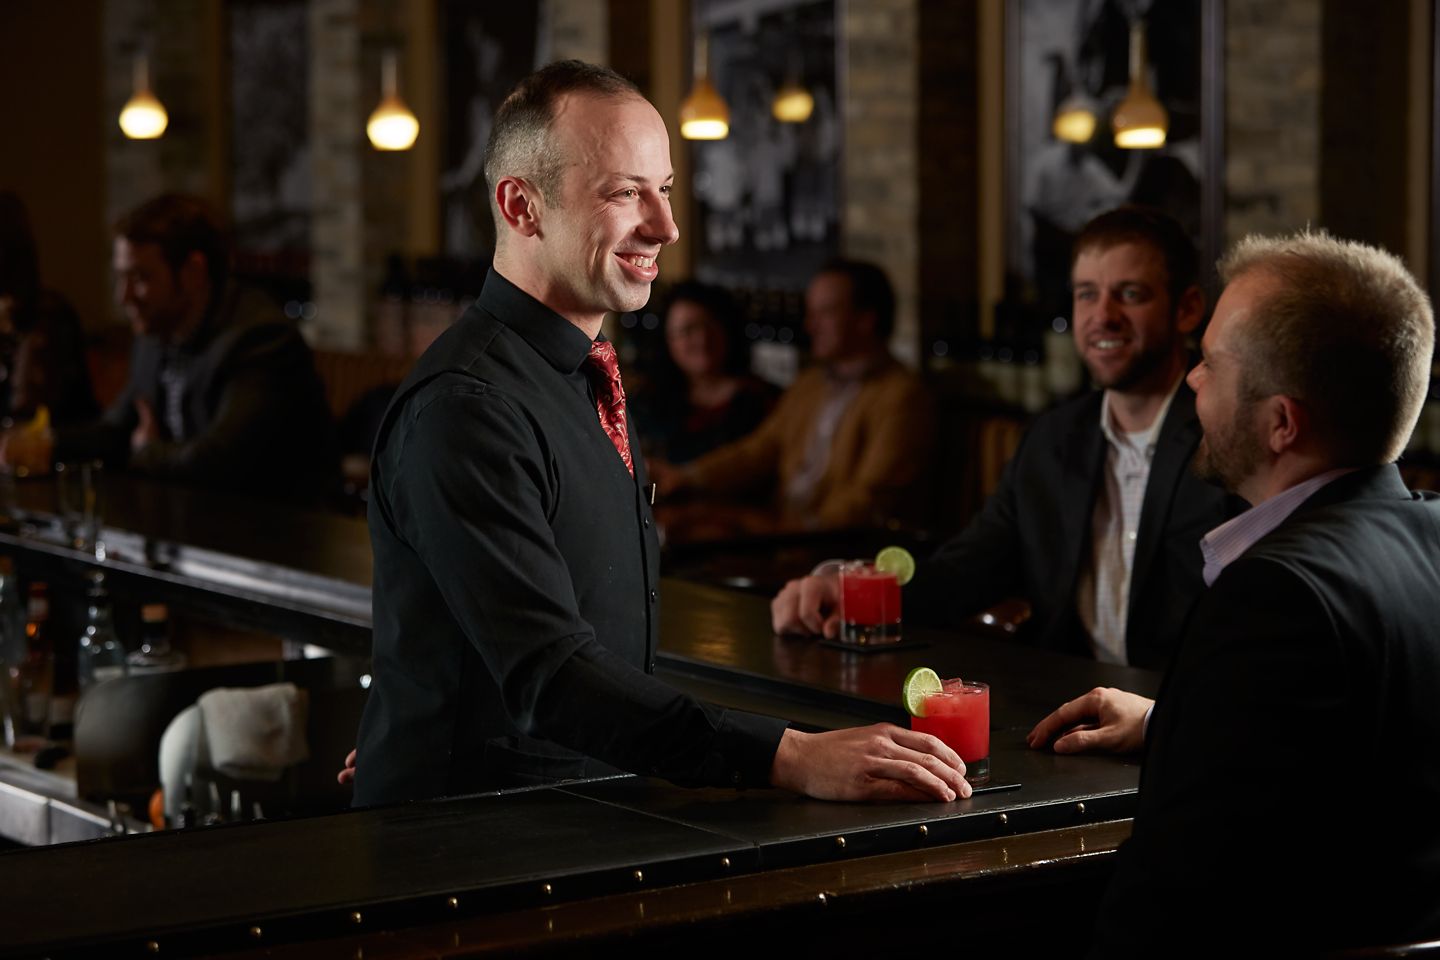 a mixologist behind the bar smiling at a guest